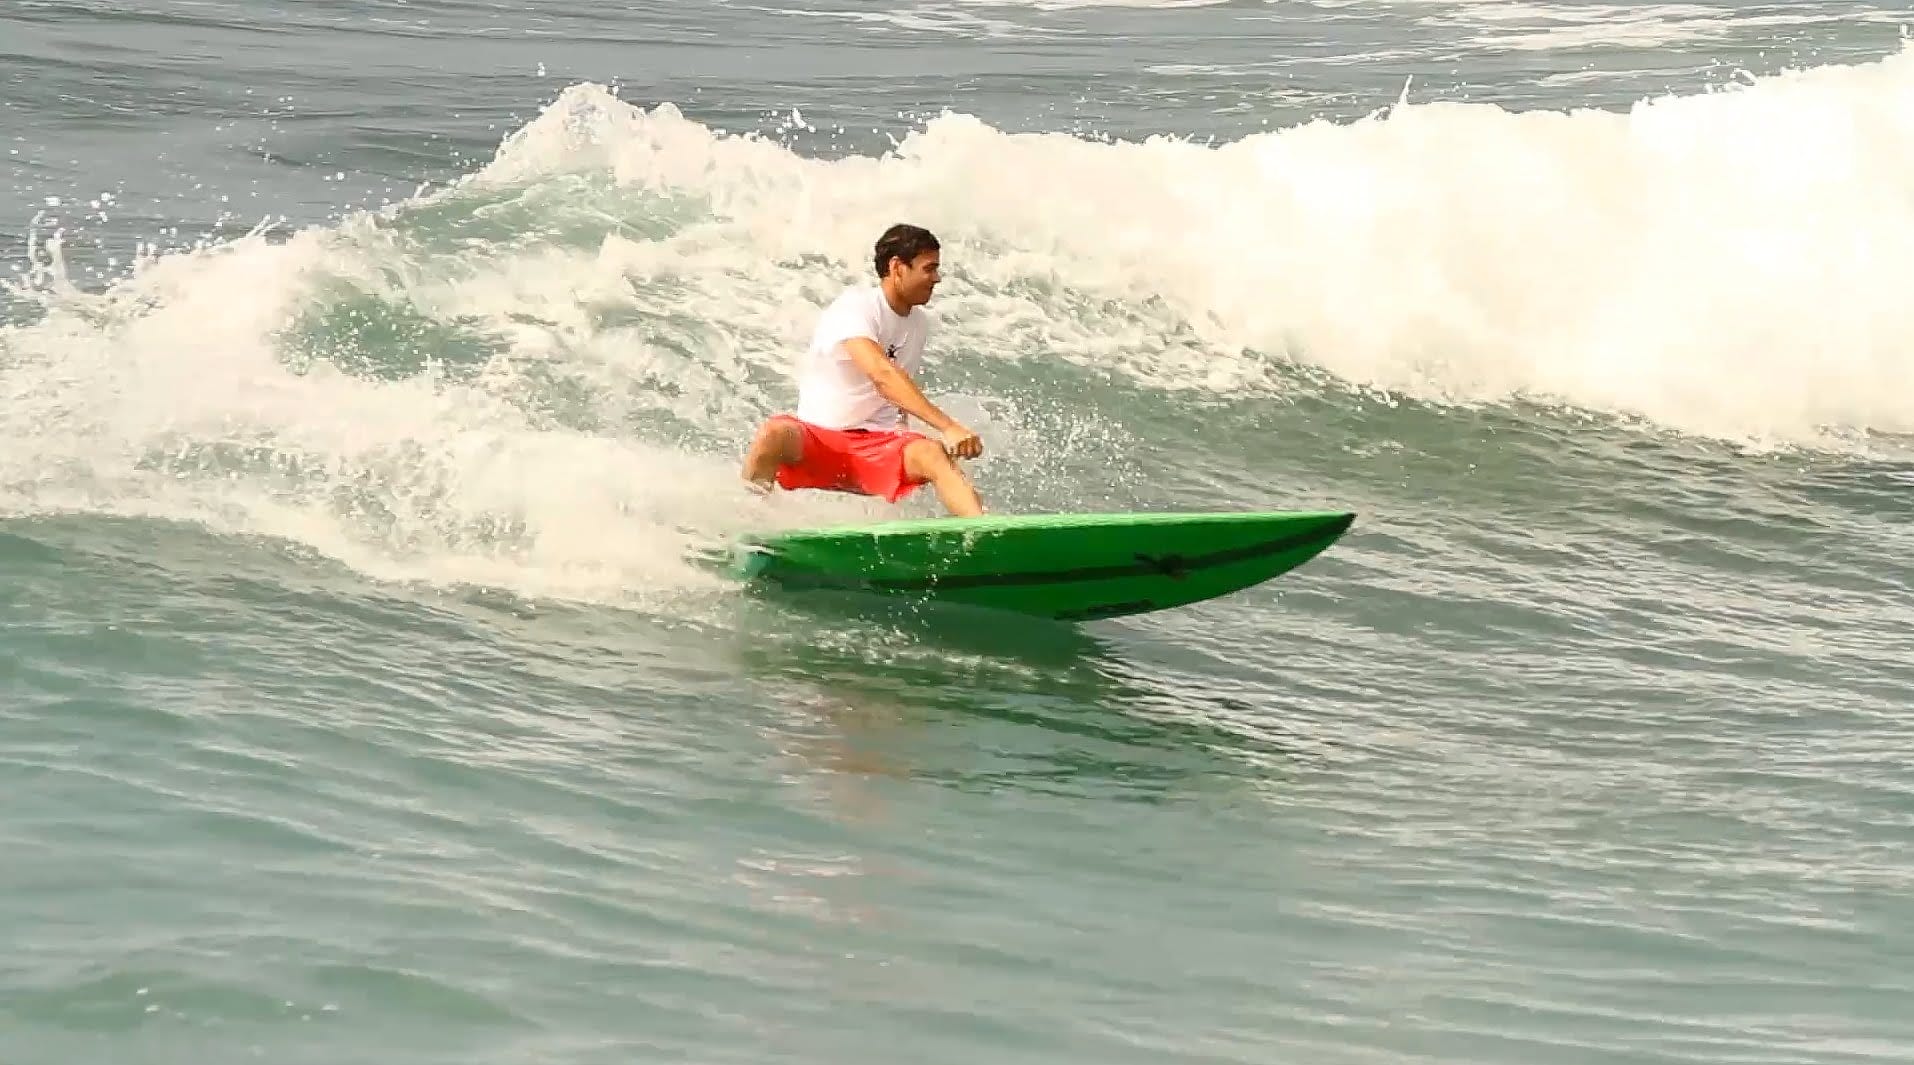 The Letourneur Brothers – California SUP Surf